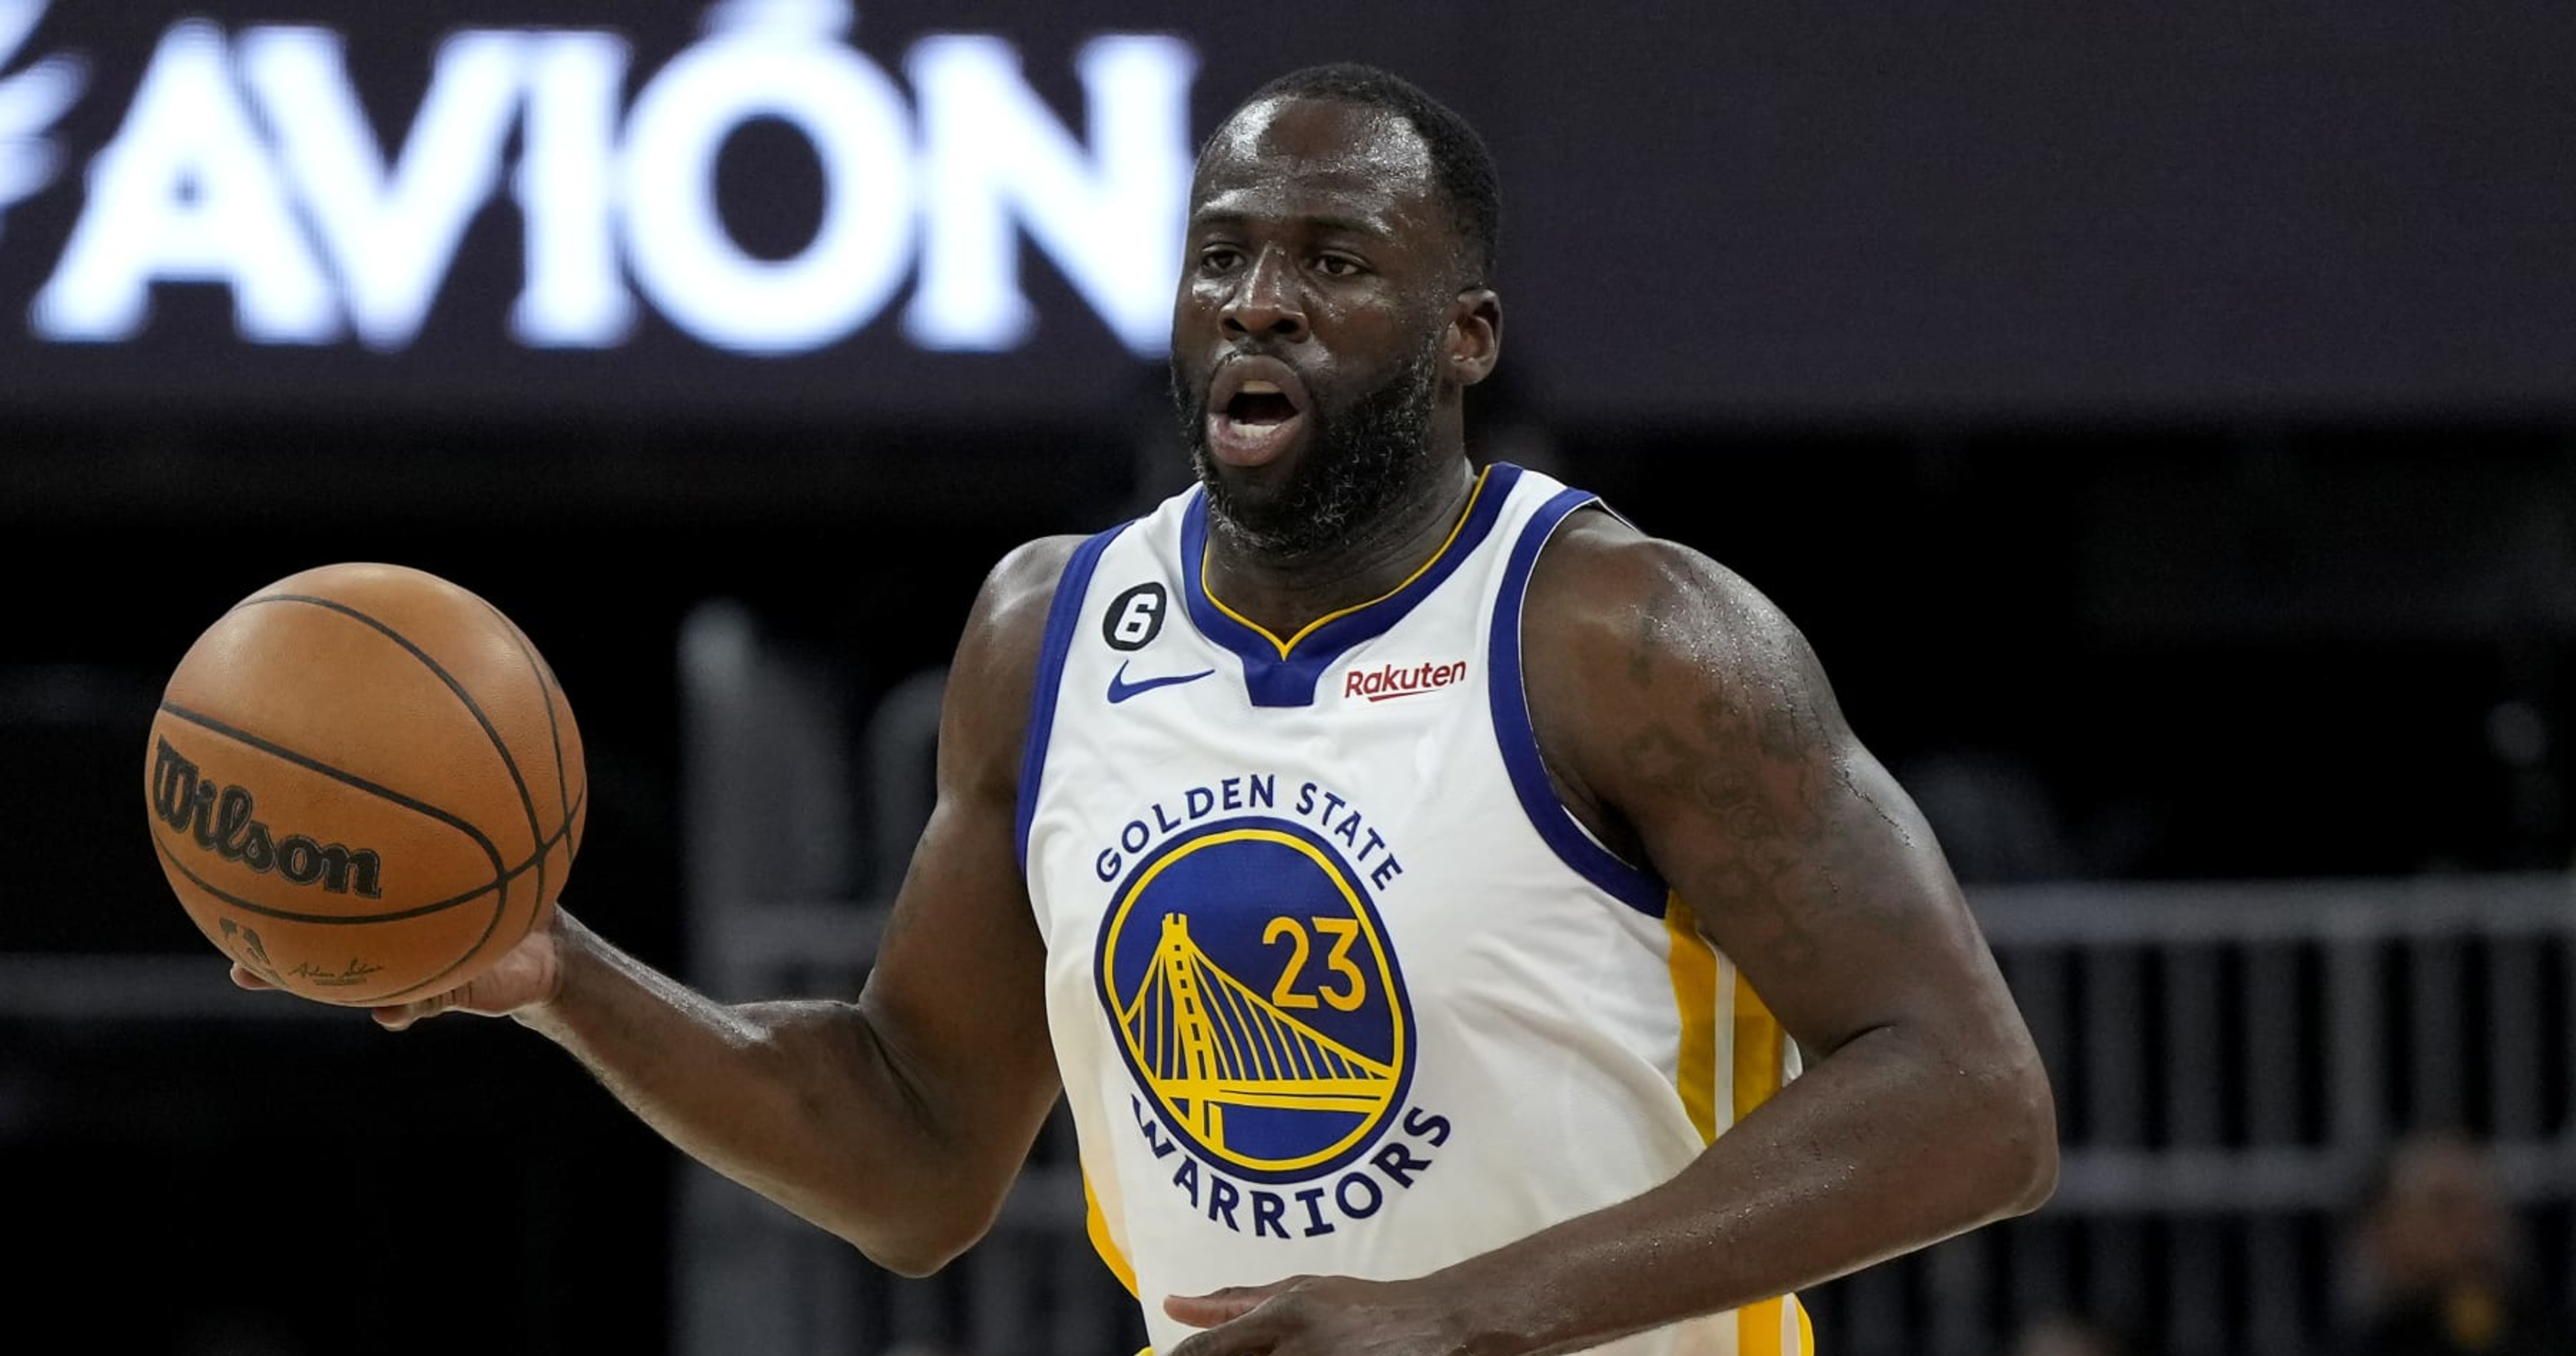 Mike Dunleavy Jr. says Warriors 'really want' Draymond Green back - ESPN